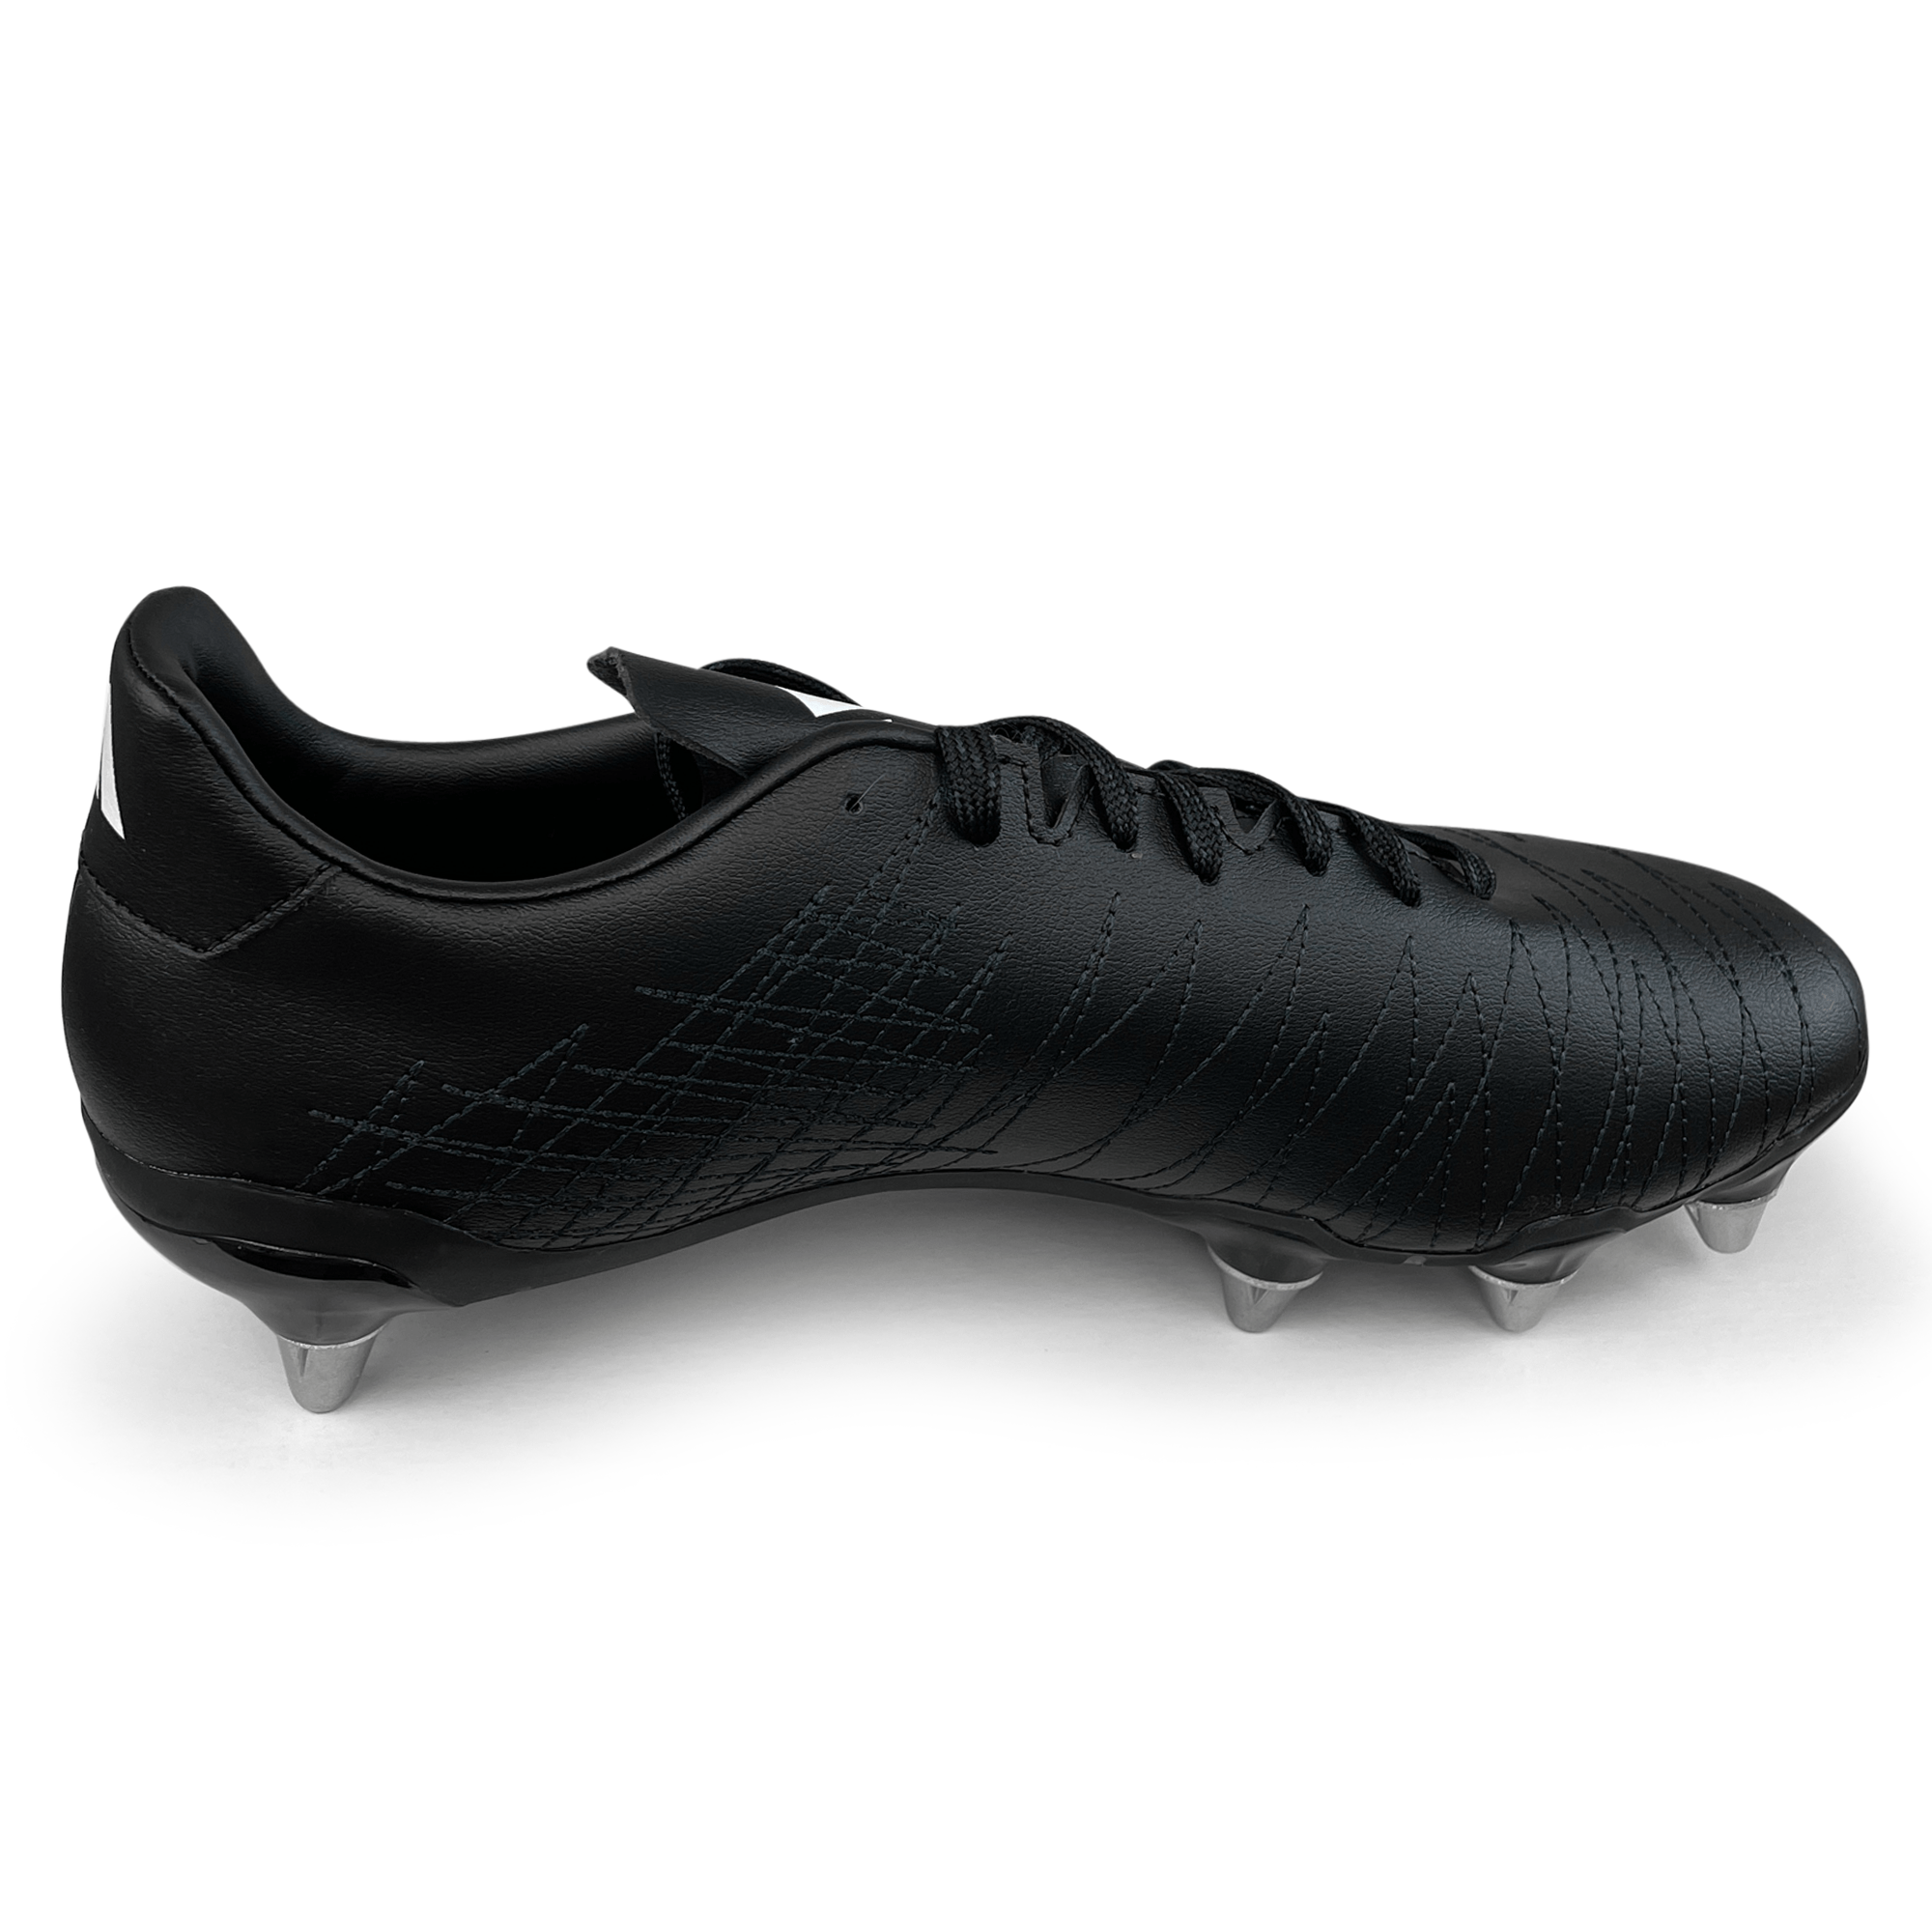 adidas Kakari Rugby Cleat - Soft Groudn - Core Black/White/Carbon - SKU ...